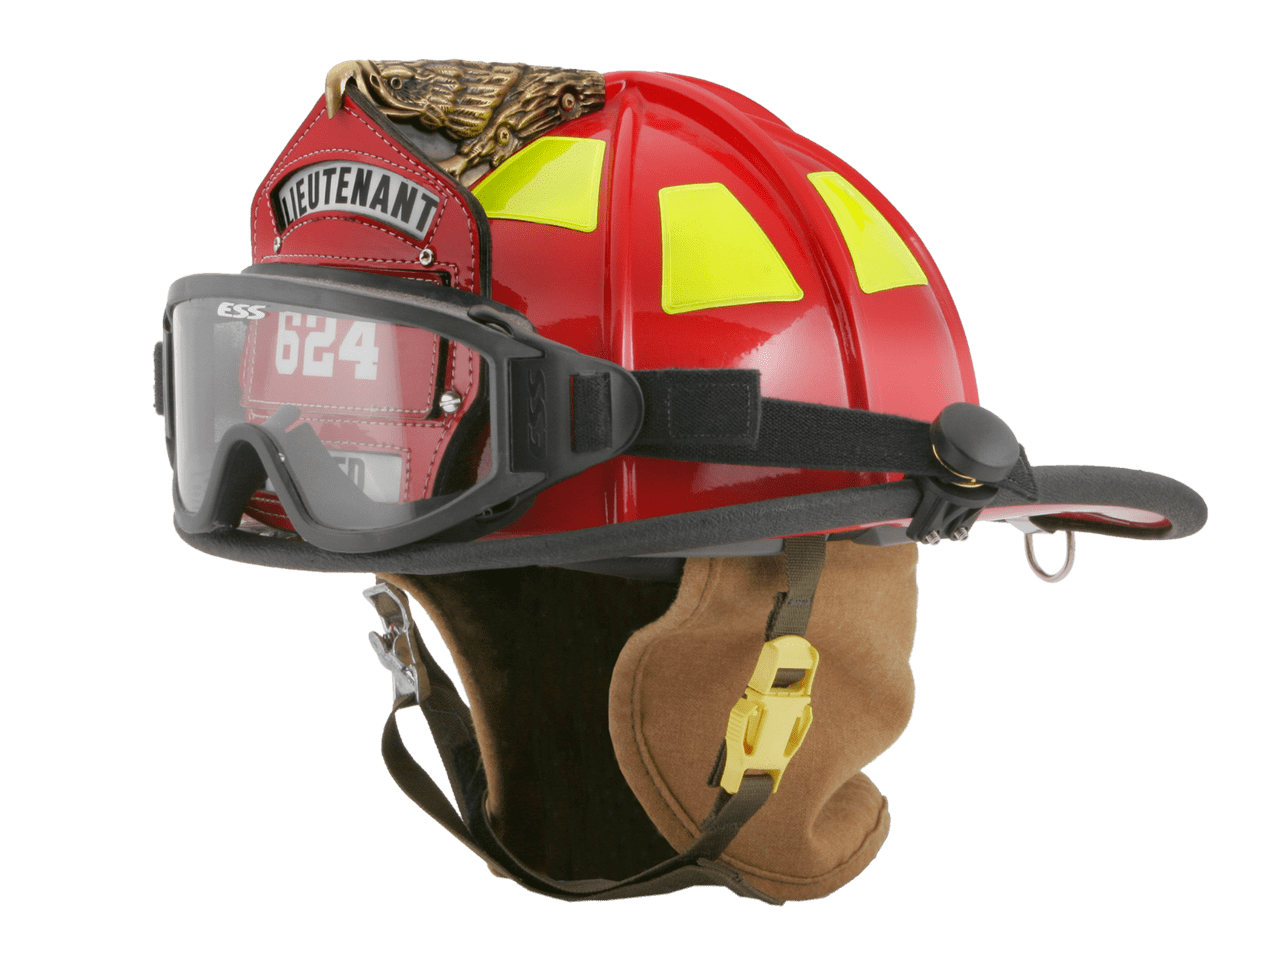 ESS Innerzone 1 NFPA 1971-2013 Fire Goggles 740-0264 Installed On Helmet